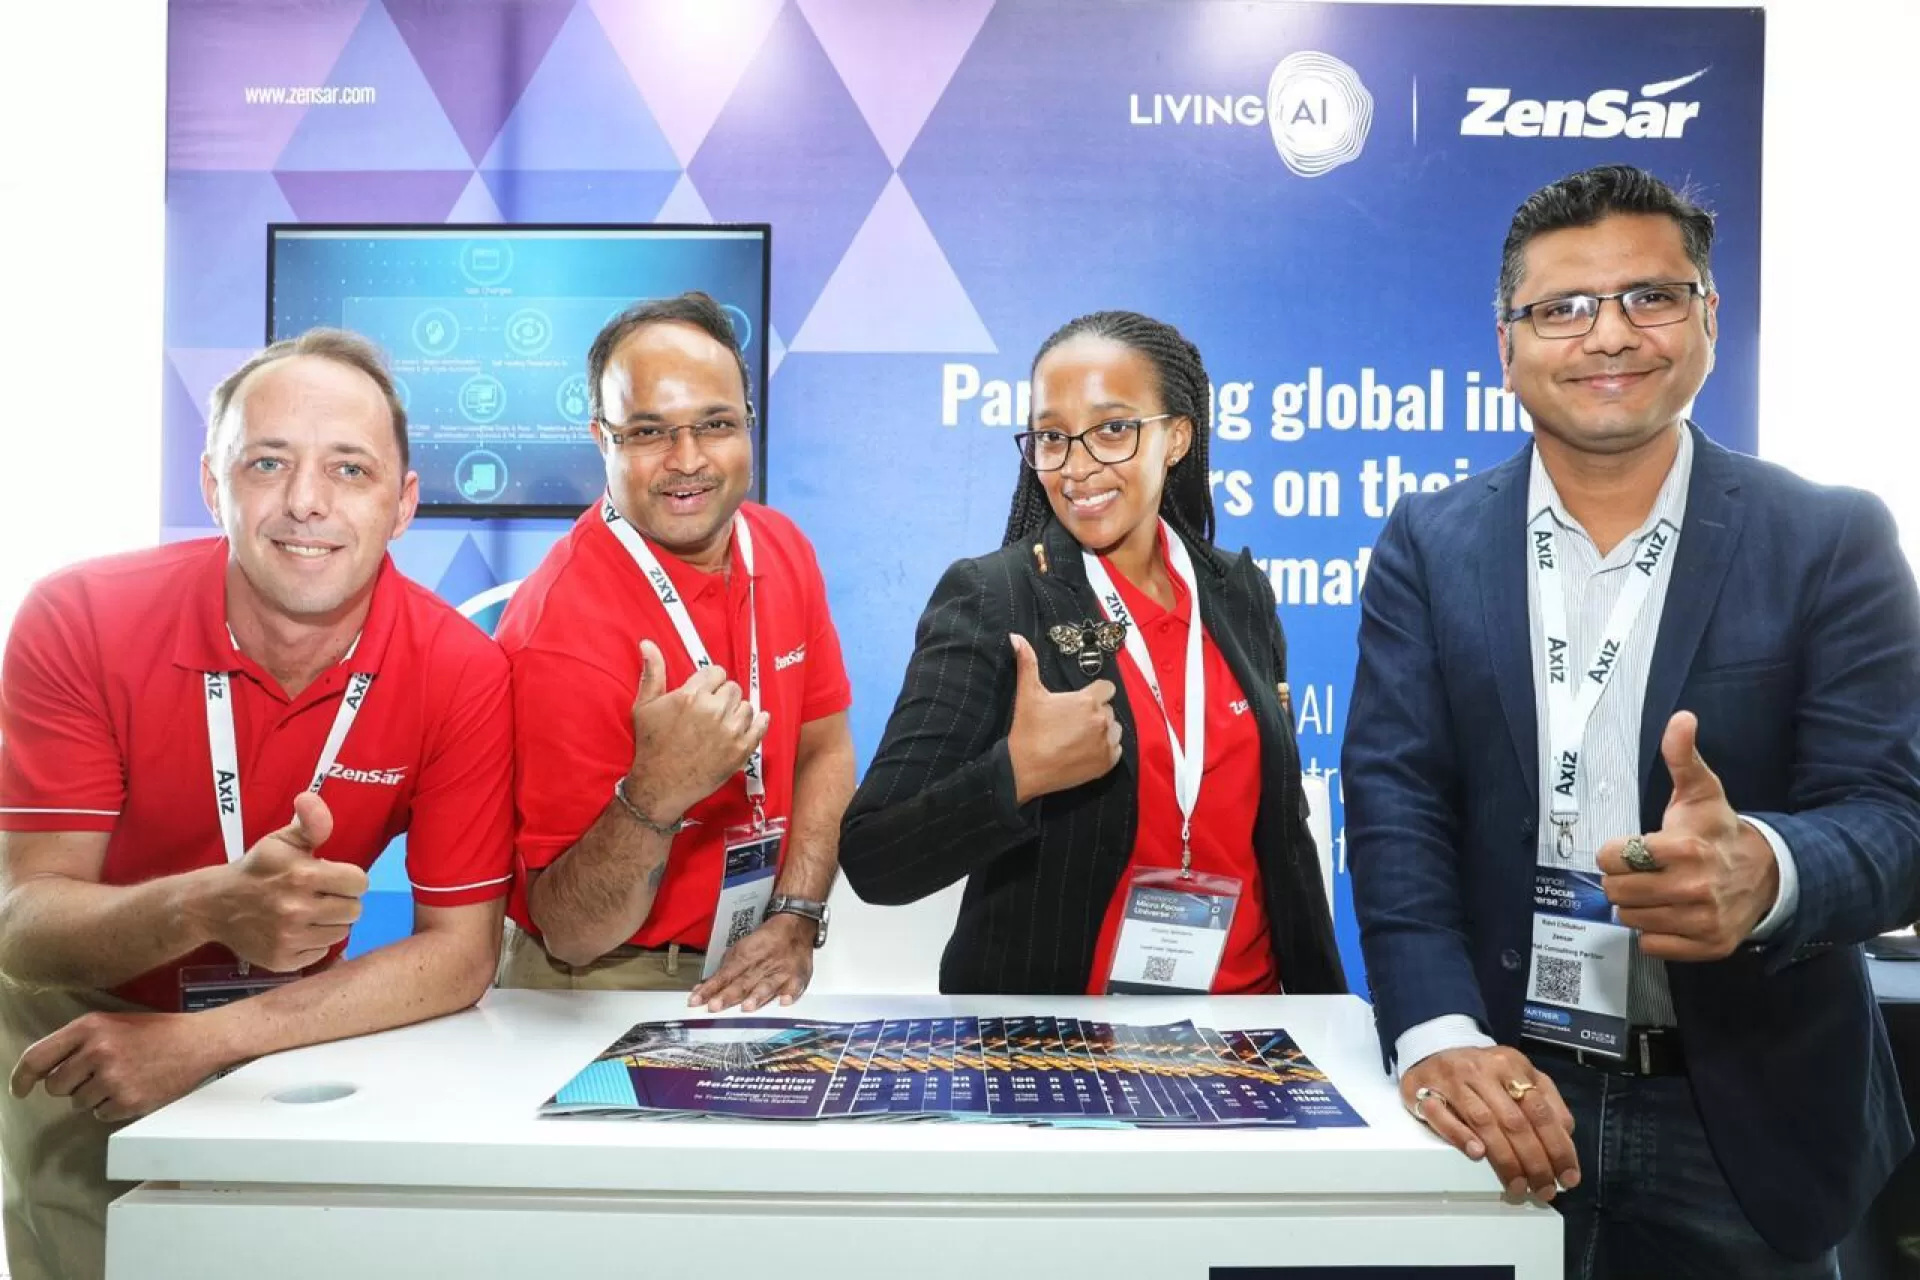 Zensar showcases Artificial Intelligence (AI) powered Digital Transformation Capabilities at Experience Micro Focus Universe, South Africa